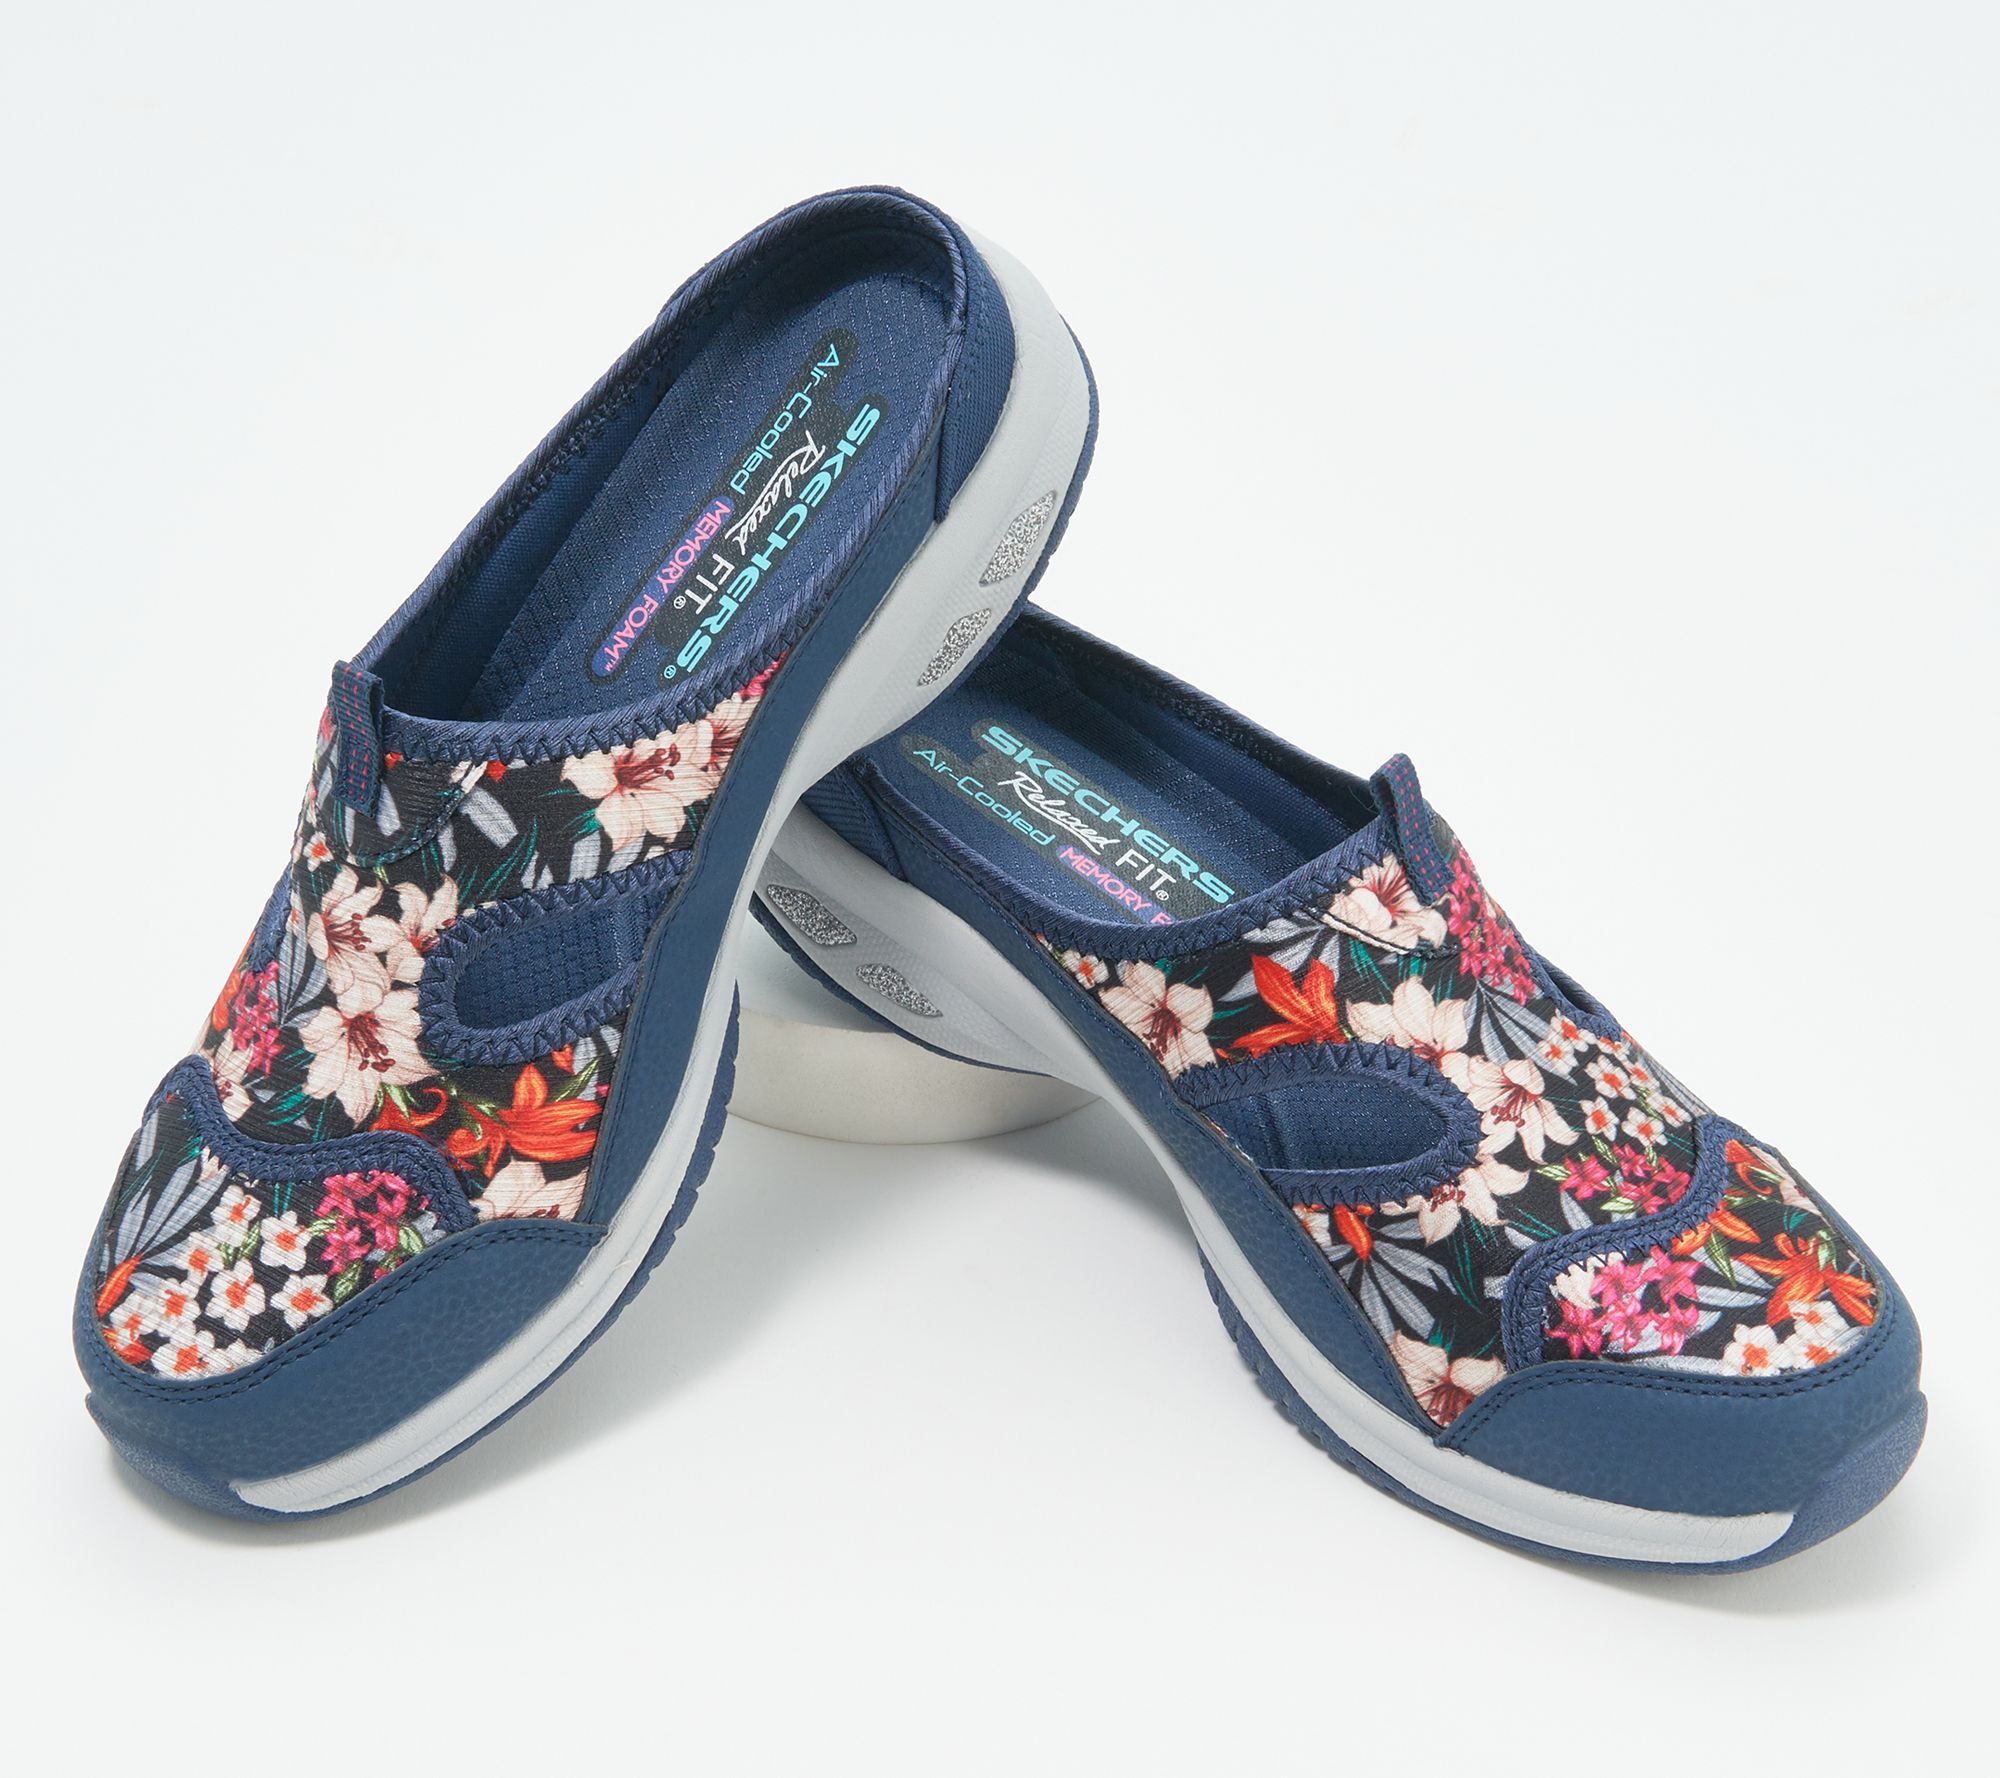 Skechers Floral Mules - Commute Time 